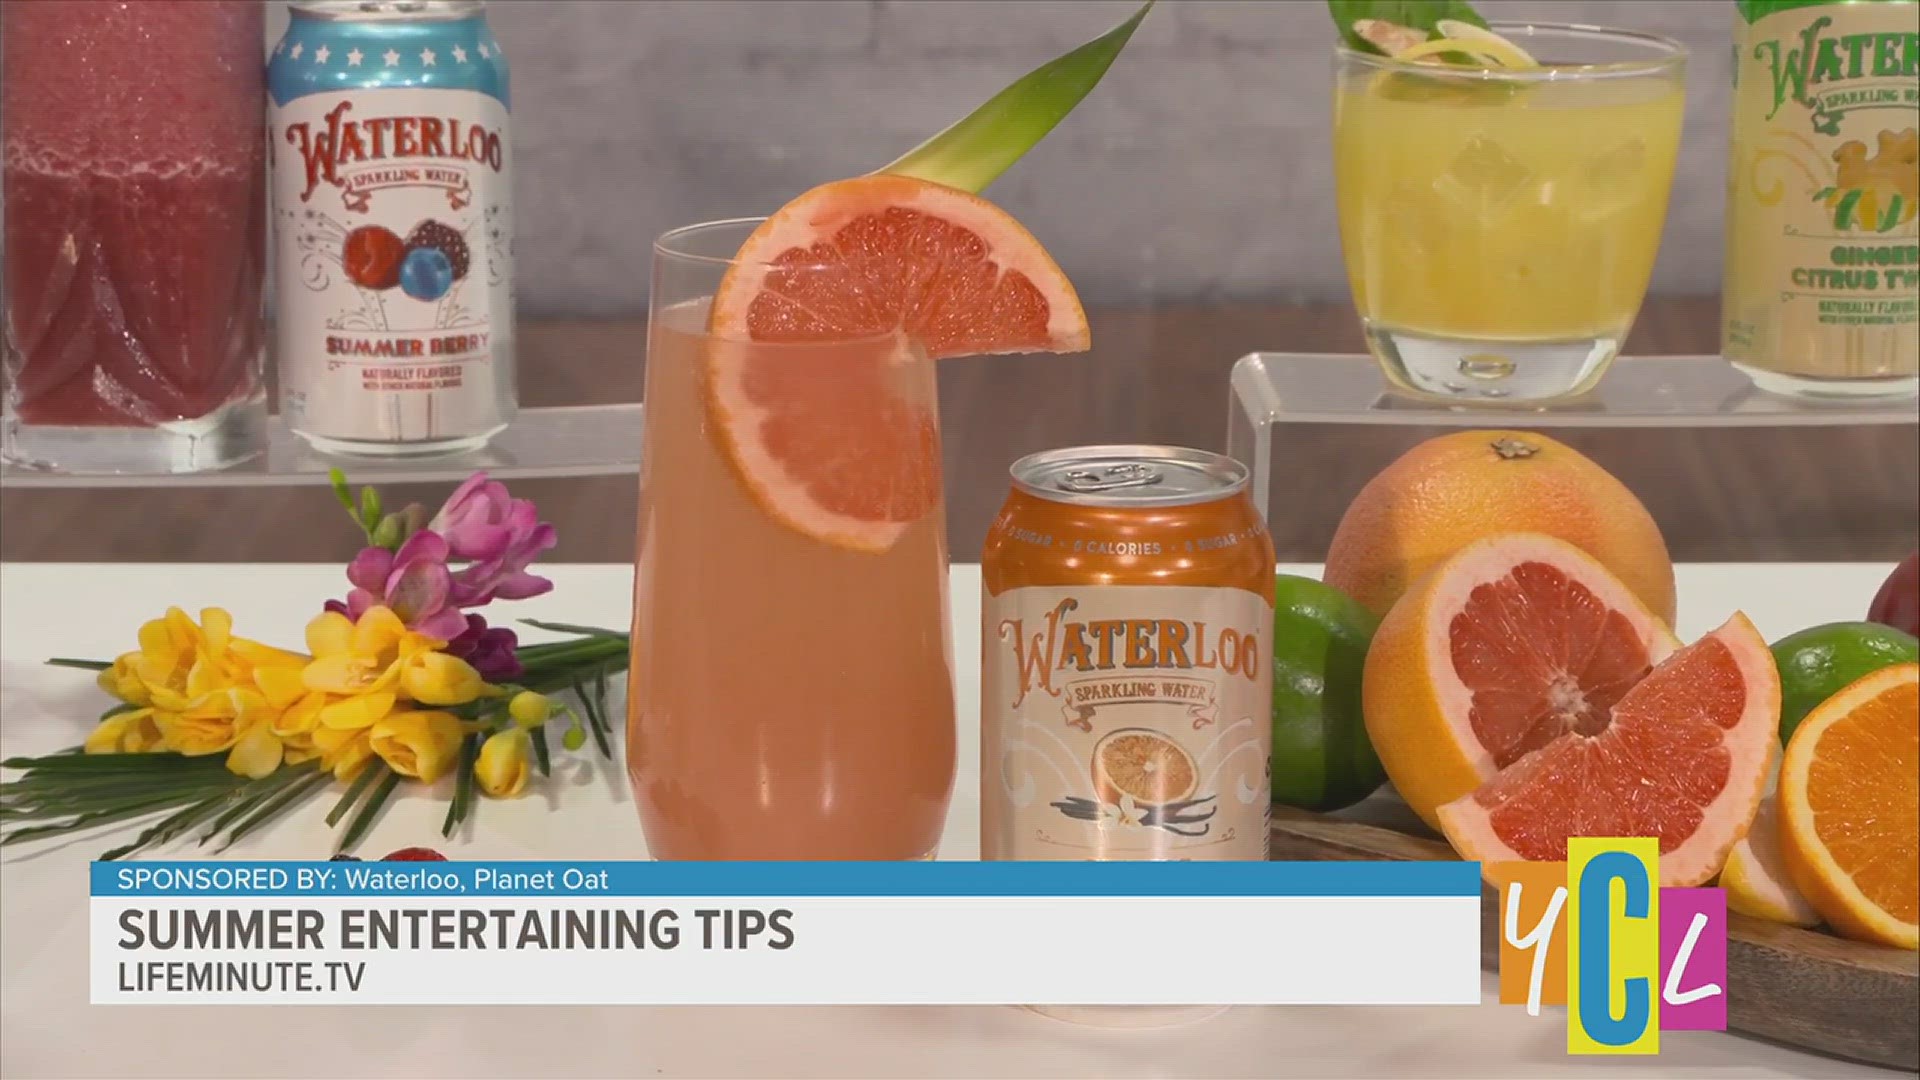 The must-have guide to entertaining this summer is just in time for Memorial Day. This segment is paid by Waterloo and Planet Oat.